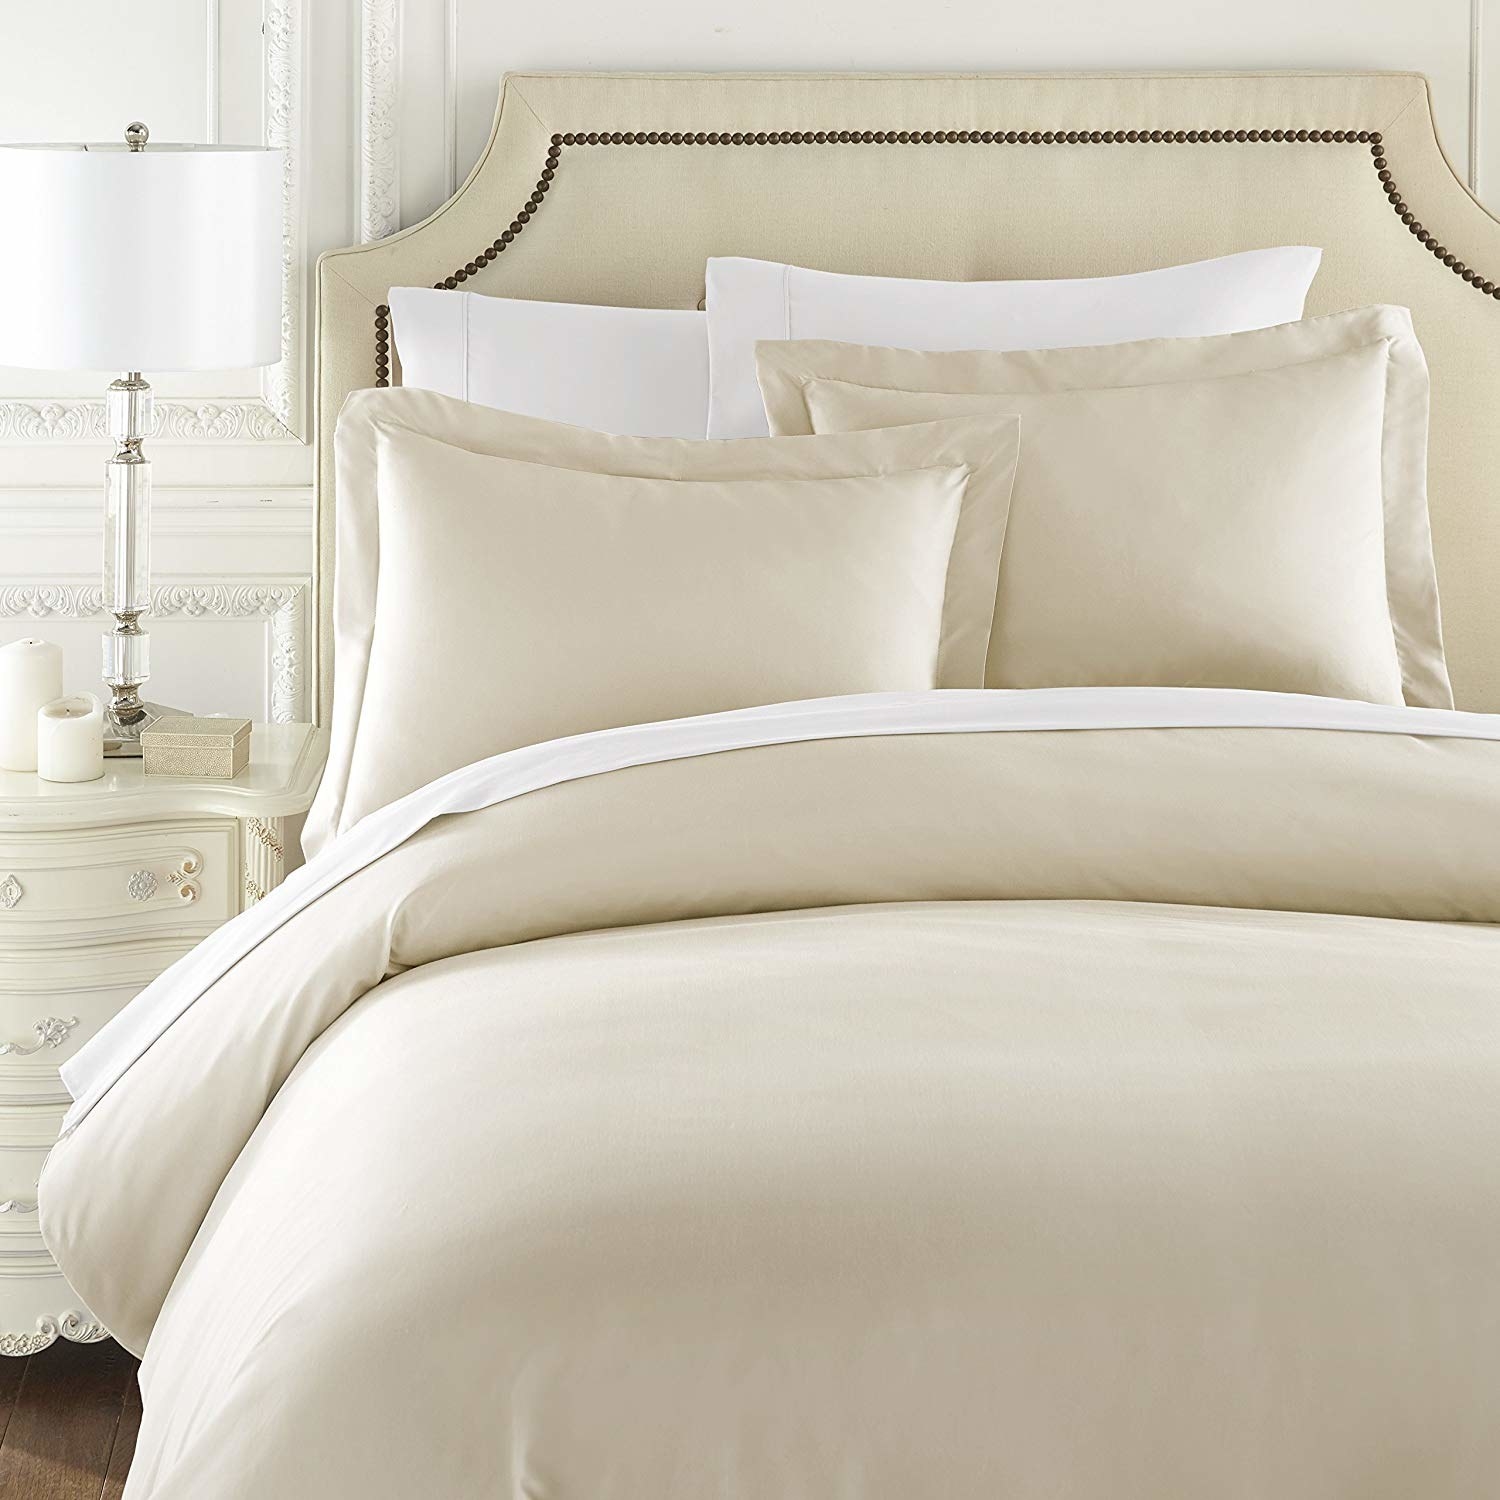 A bed with the off white bedding